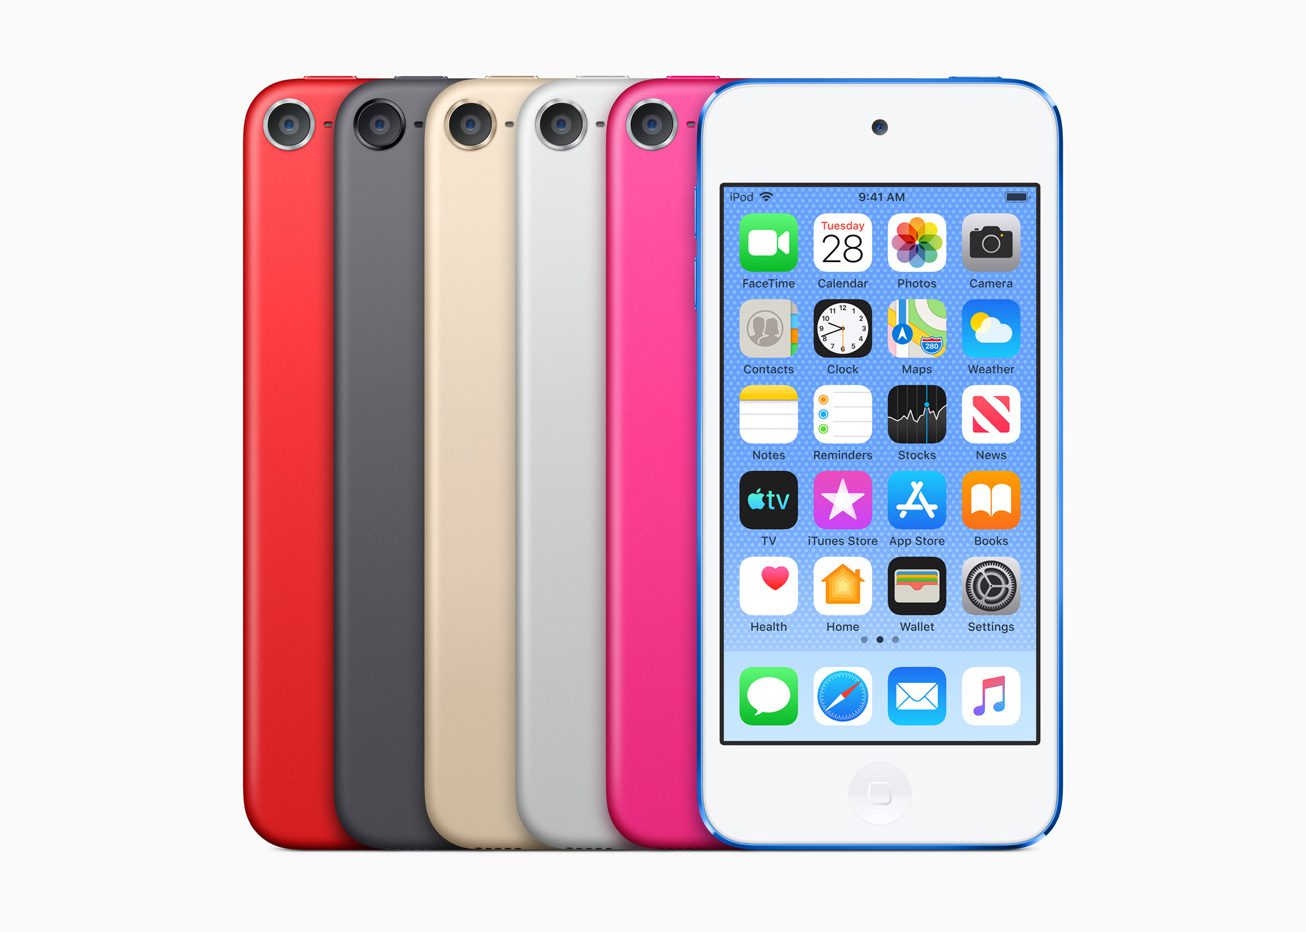 Apple 7th Generation iPod Touch lineup with red, black, gold, silver, pink, and blue models shown.